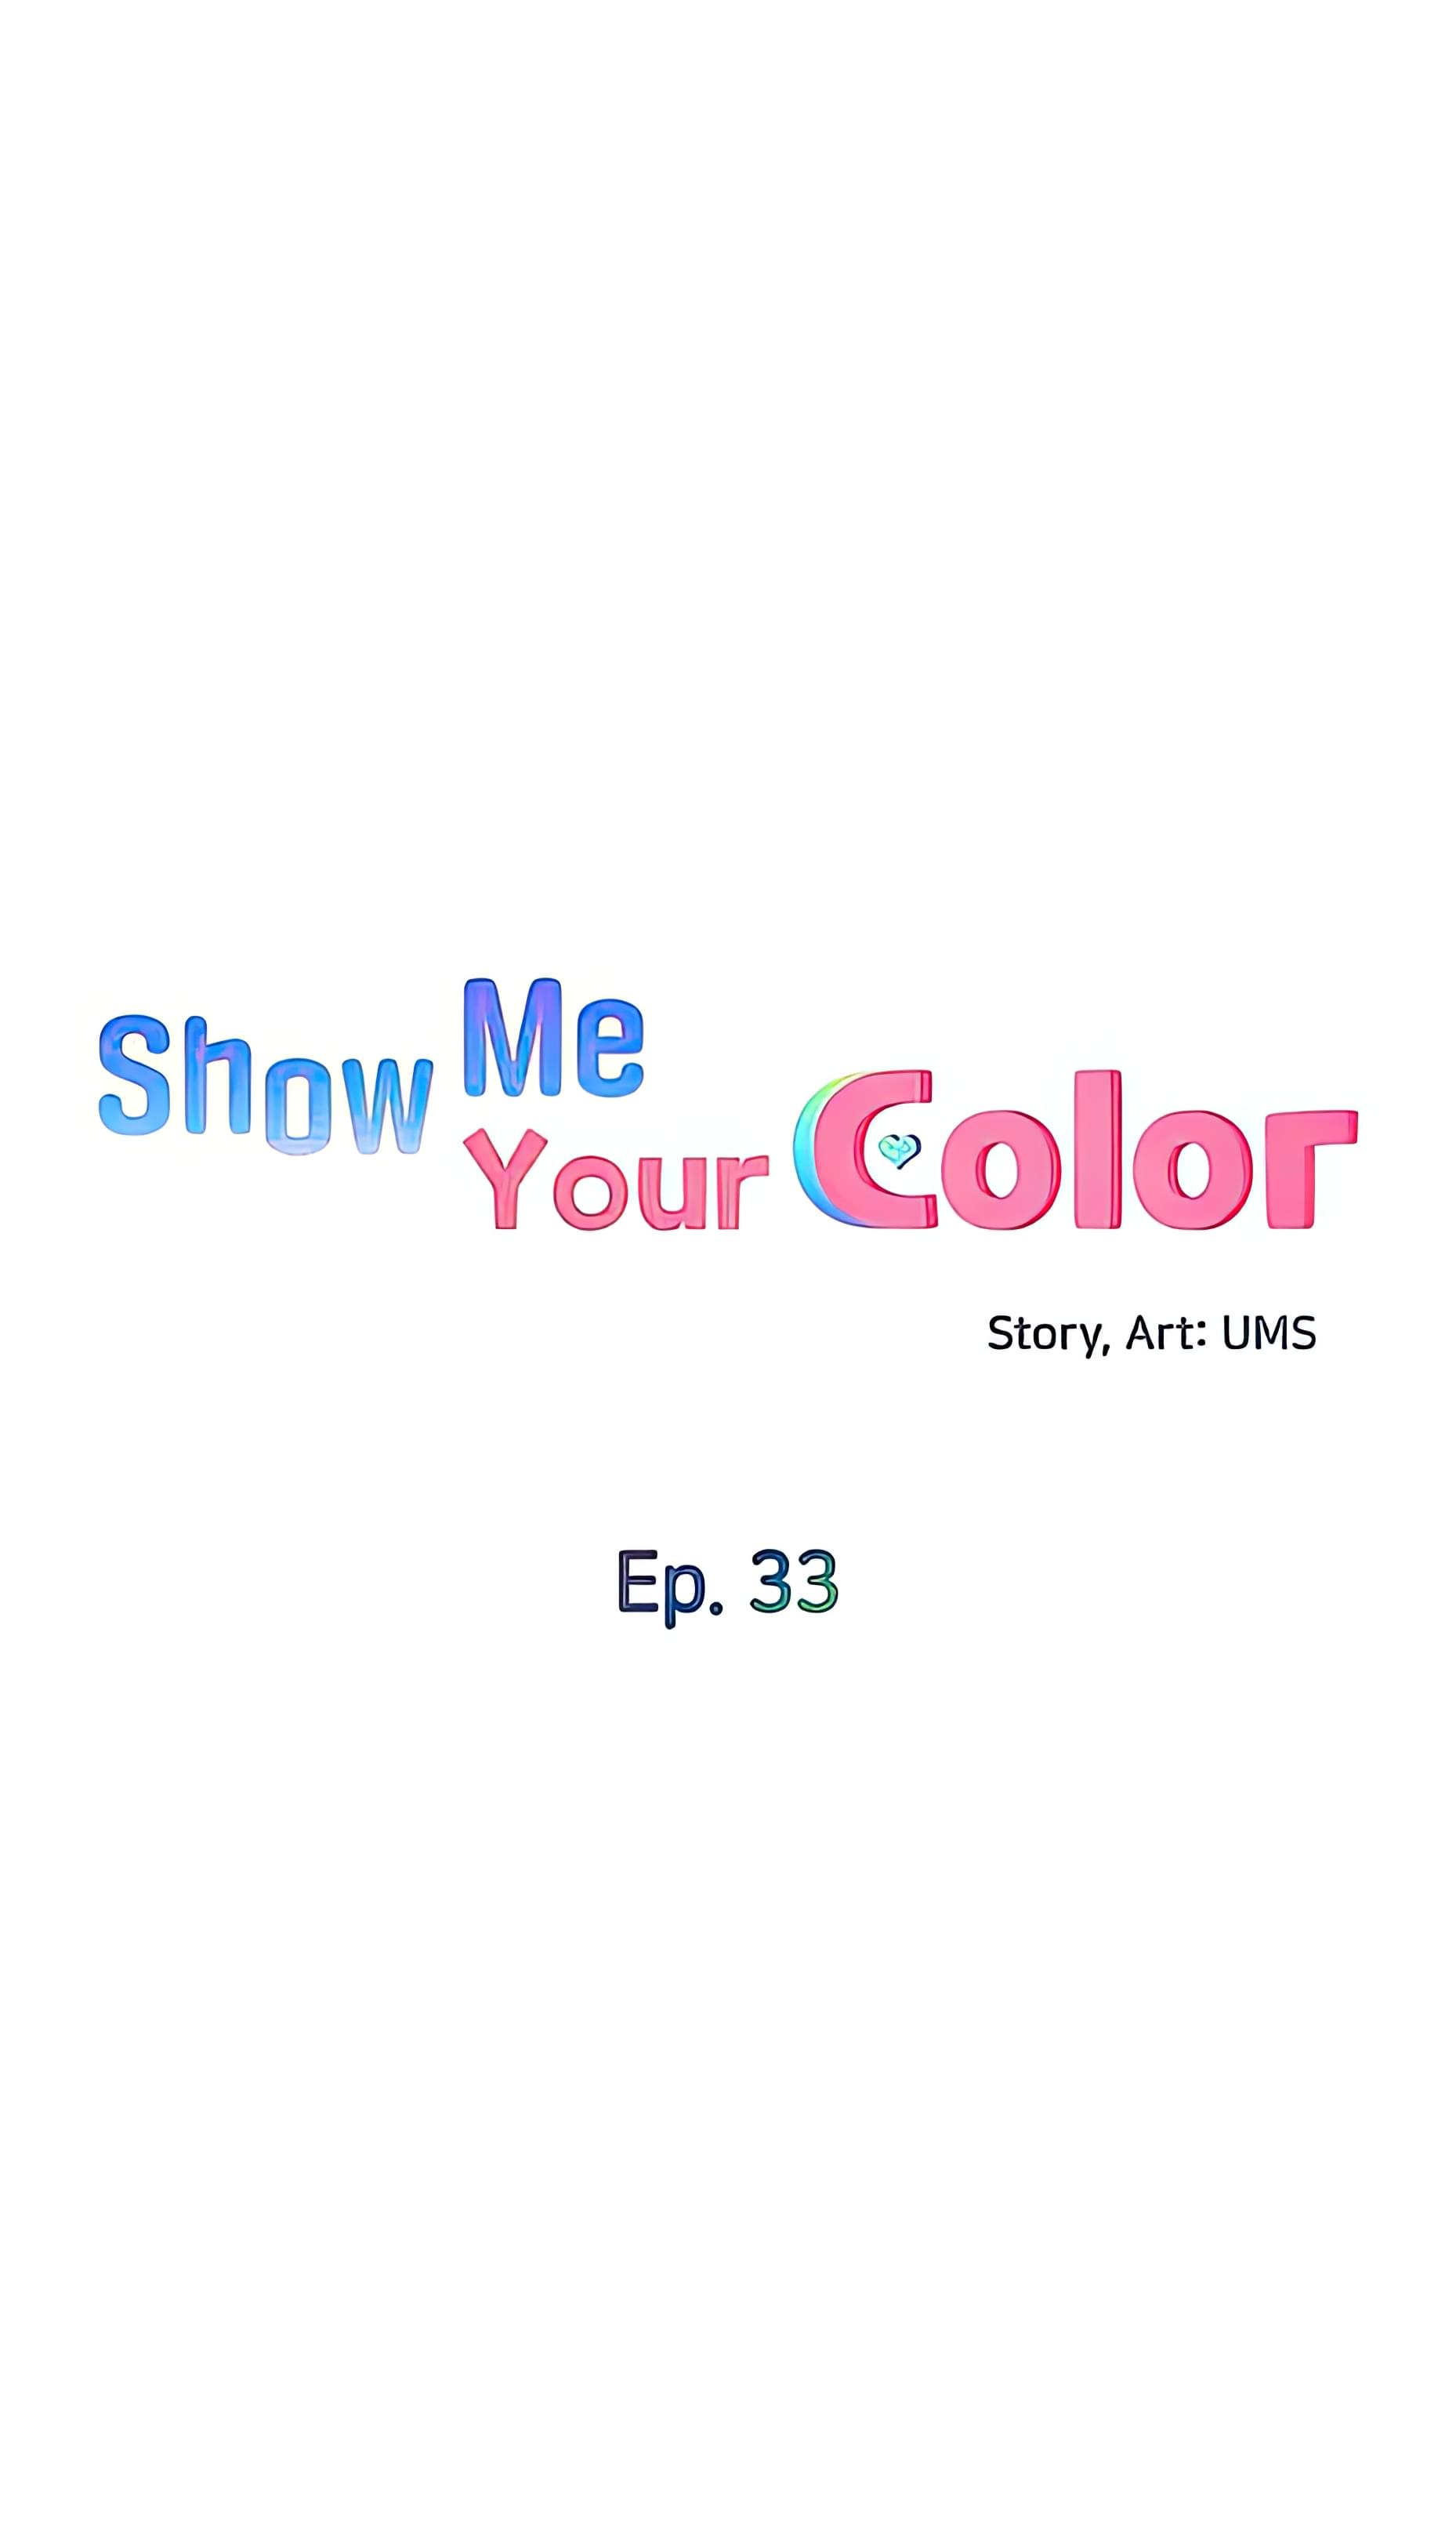 Show Me Your Color NEW image